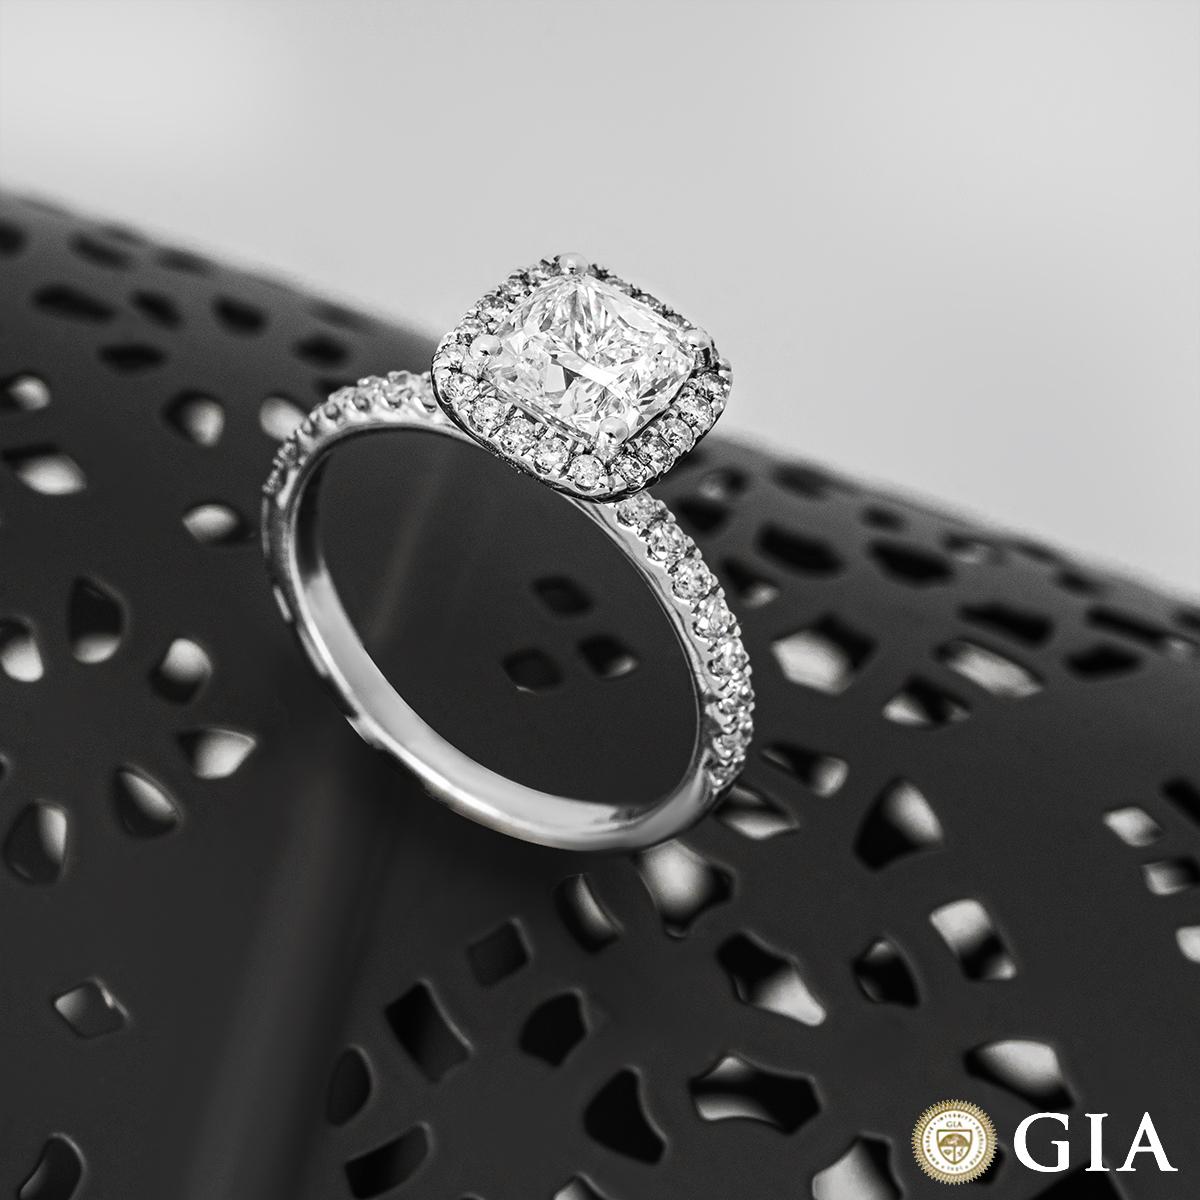 GIA Certified White Gold Cushion Cut Diamond Engagement Ring 1.51ct F/VS2 For Sale 2